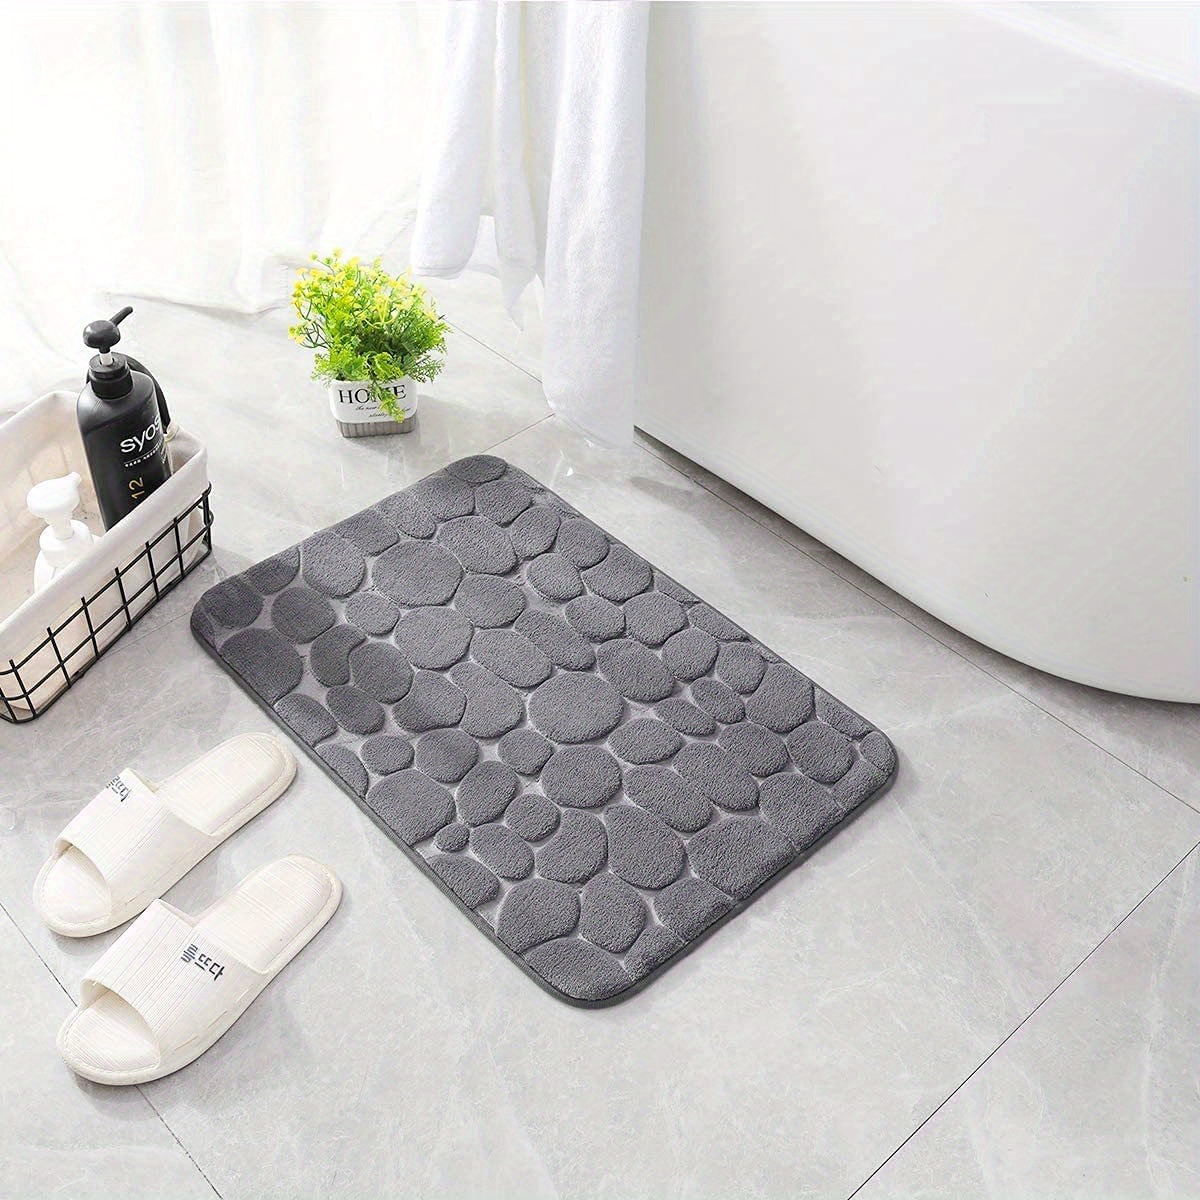 1pc soft and comfortable memory foam bath rug with cobblestone embossment rapid water absorbent and washable non slip perfect for shower room and bathroom accessories bathroom decorations kitchen area rugs bedrooom bathroom accessories details 3